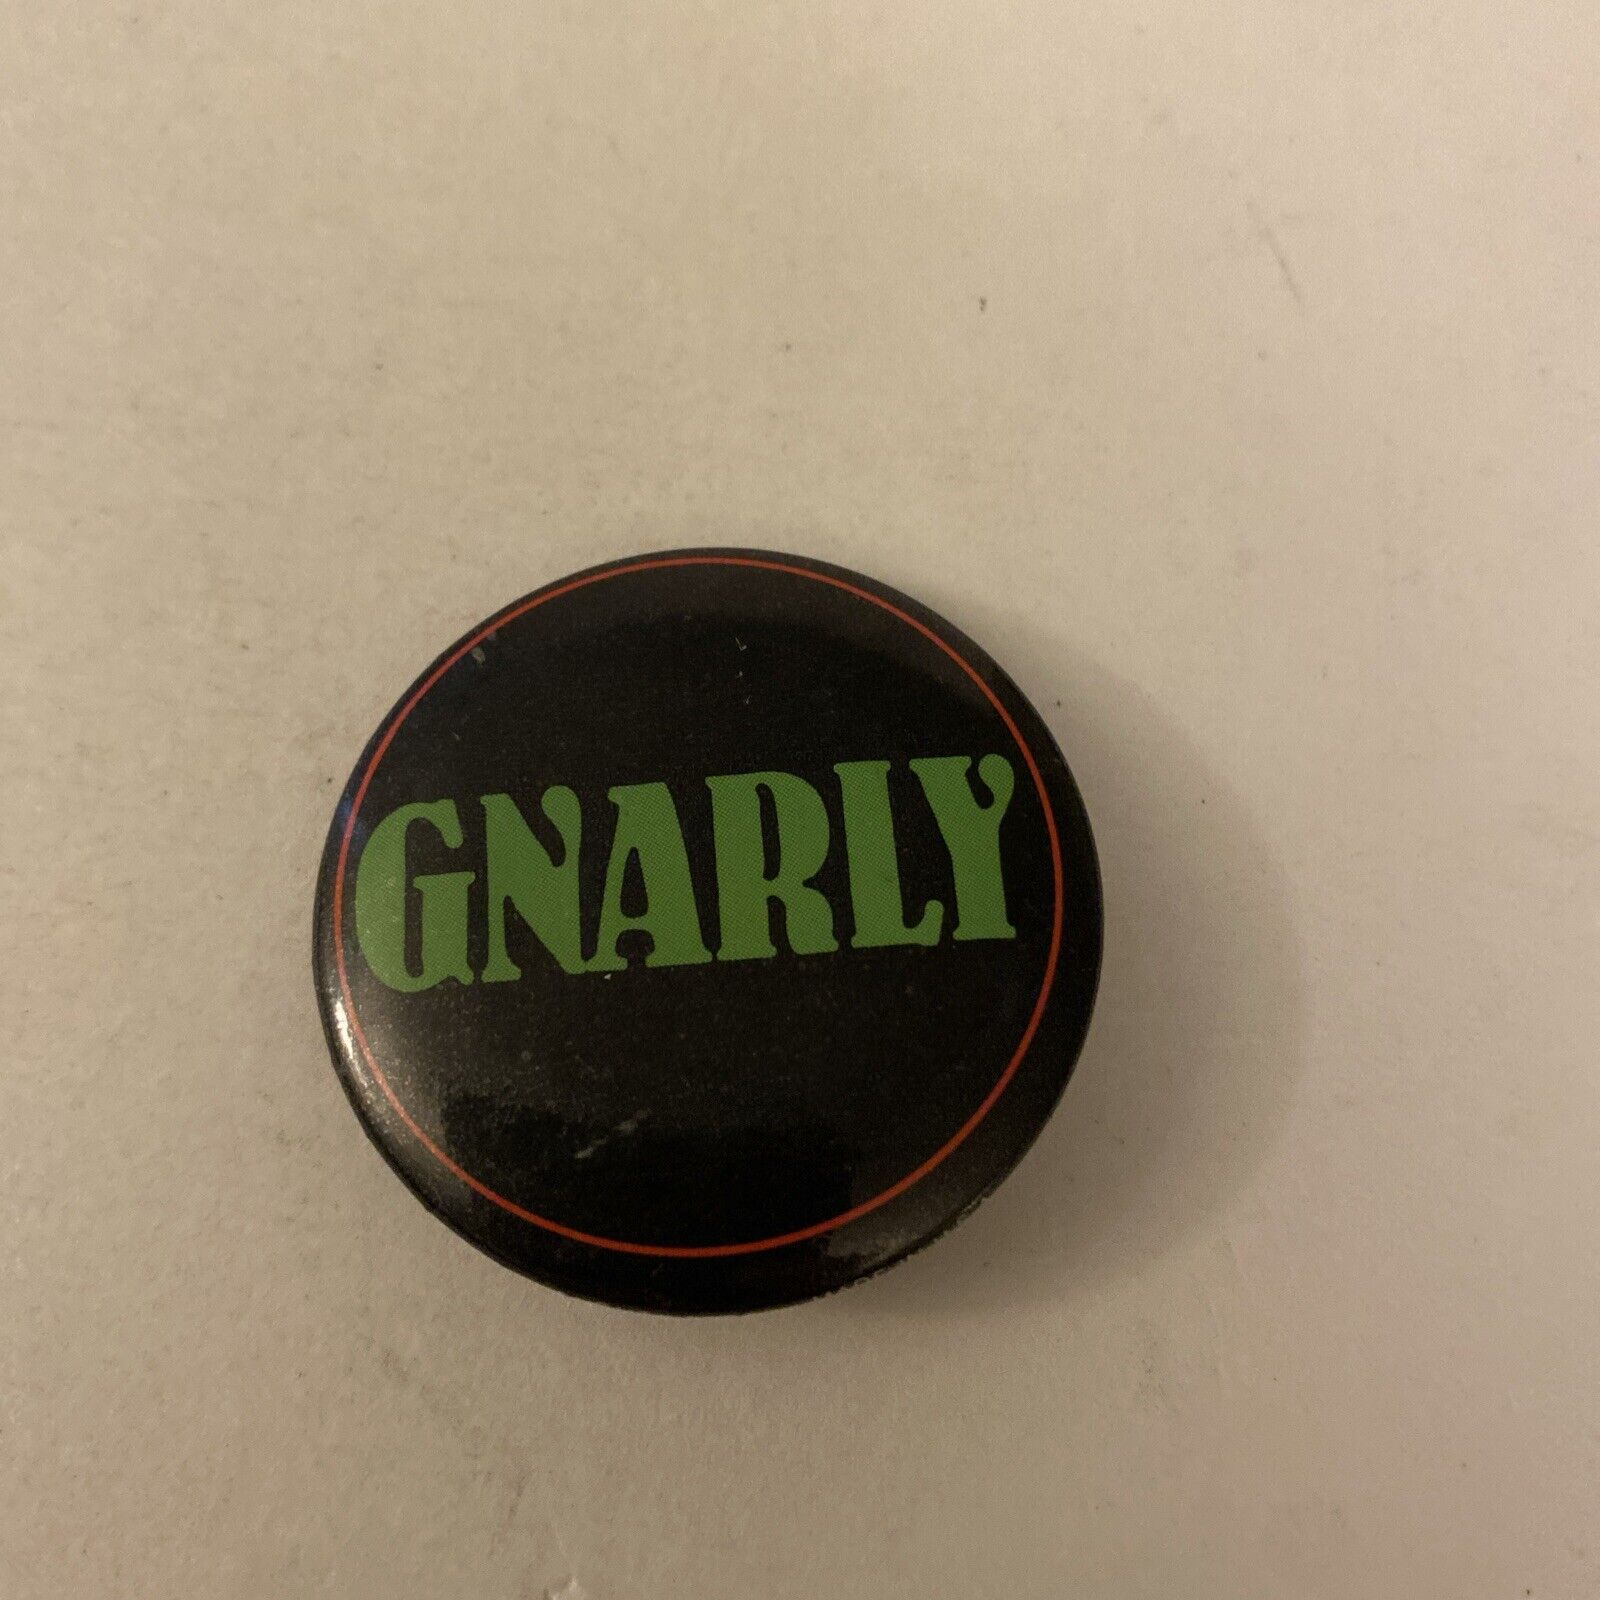 VINTAGE 1982 GNARLY PINBACK BUTTON 